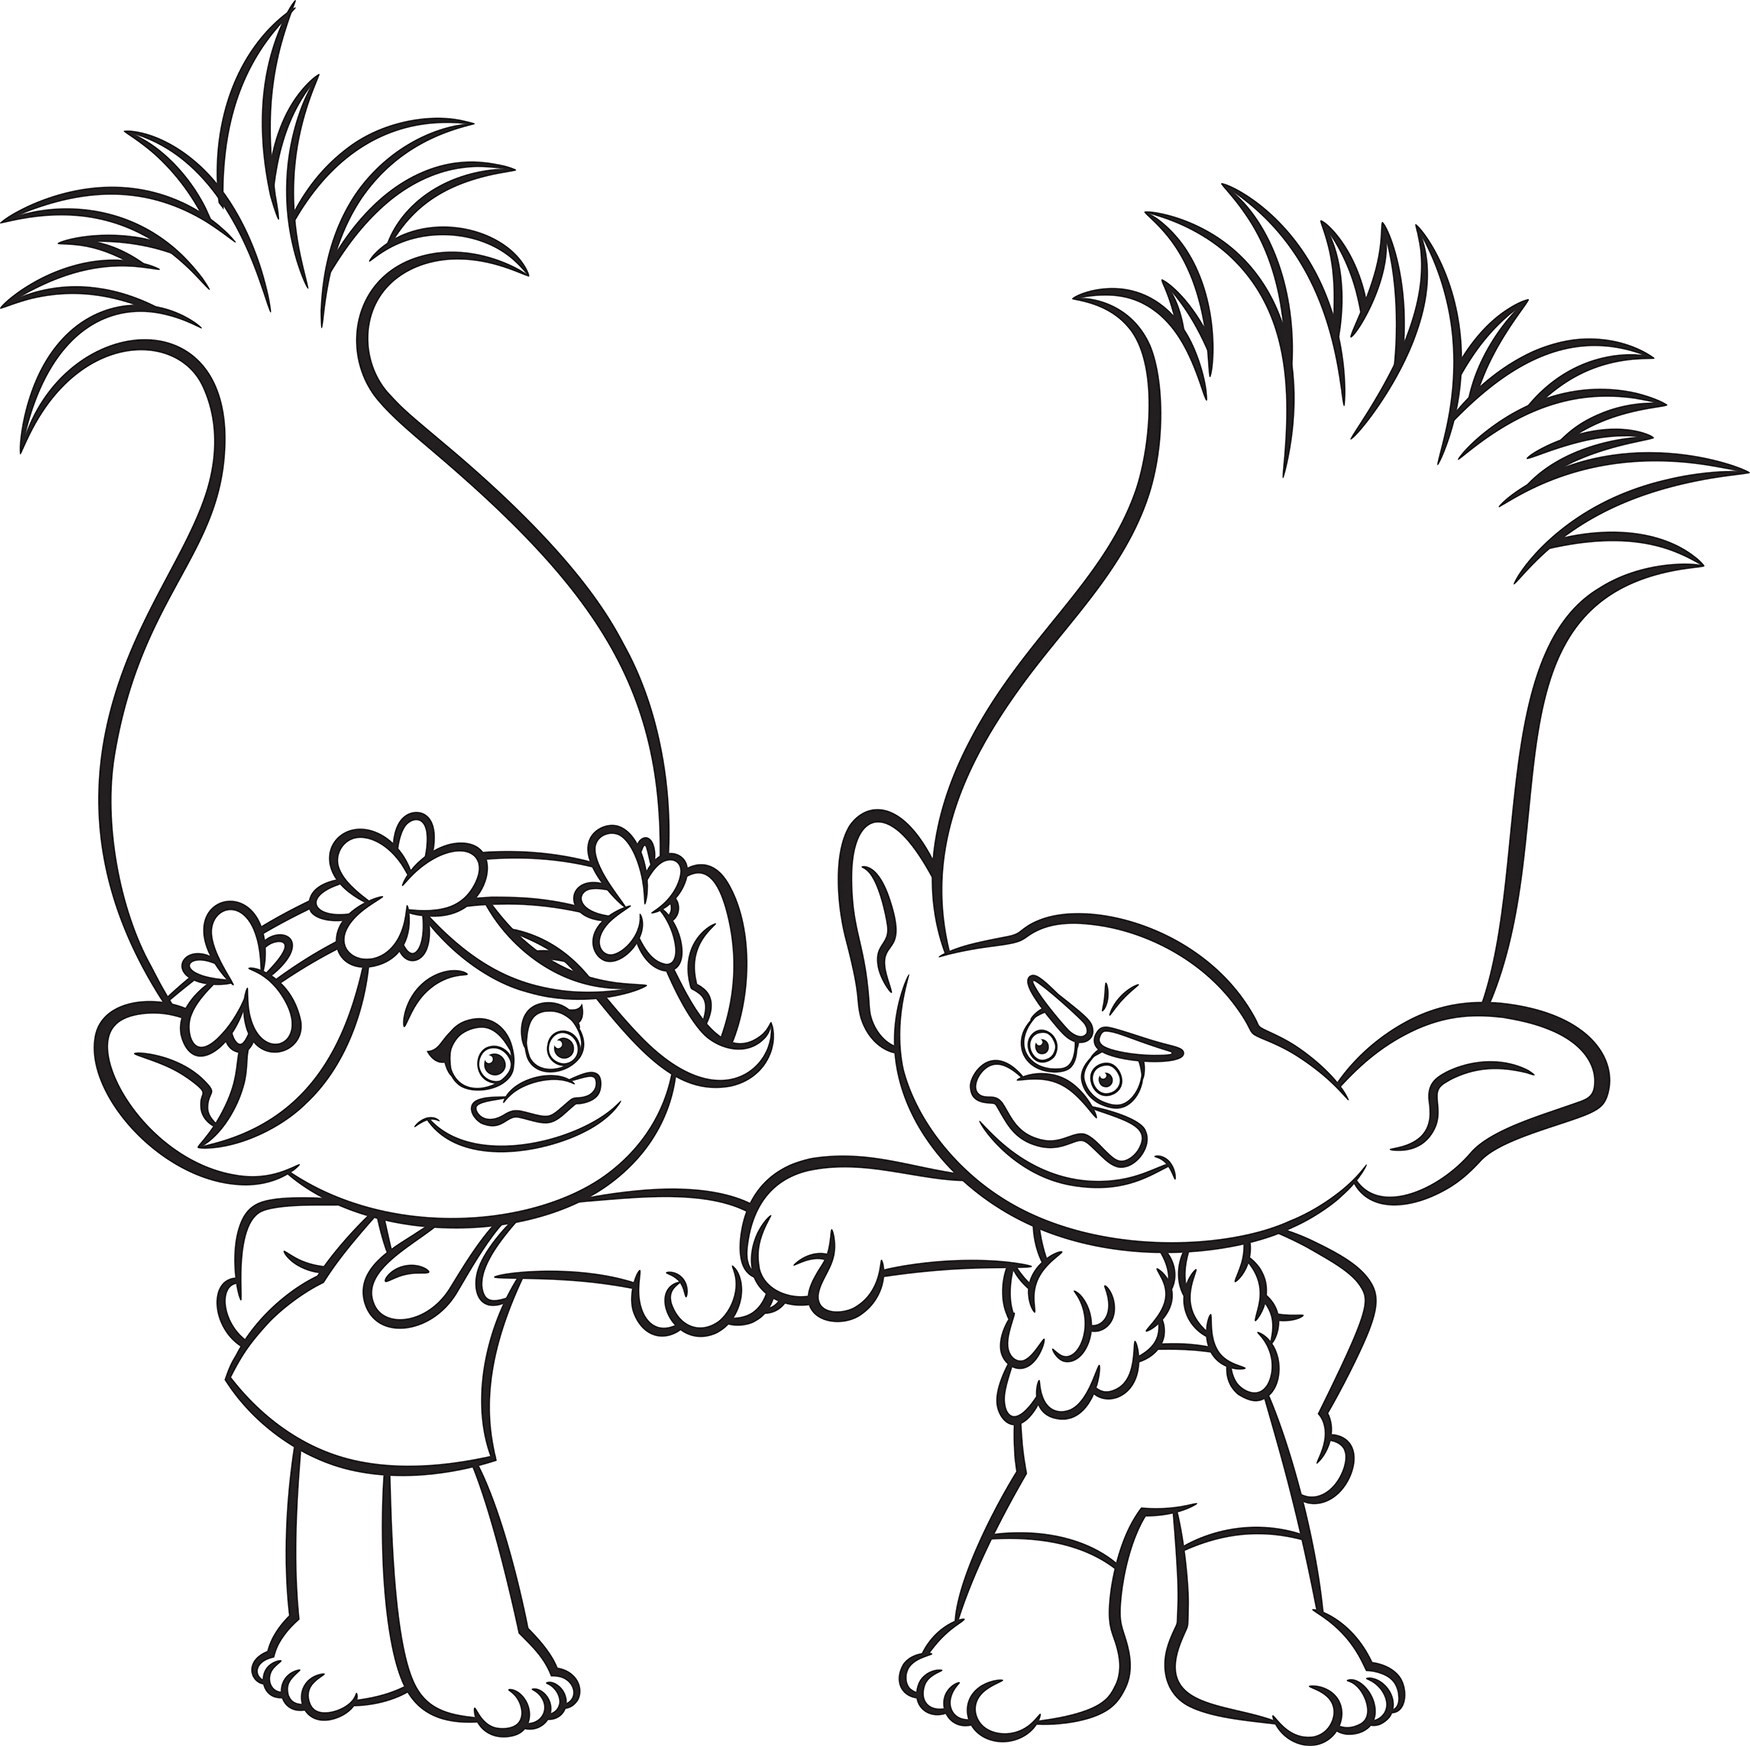 Trolls Printable Coloring Pages
 Trolls Movie Coloring Pages Best Coloring Pages For Kids